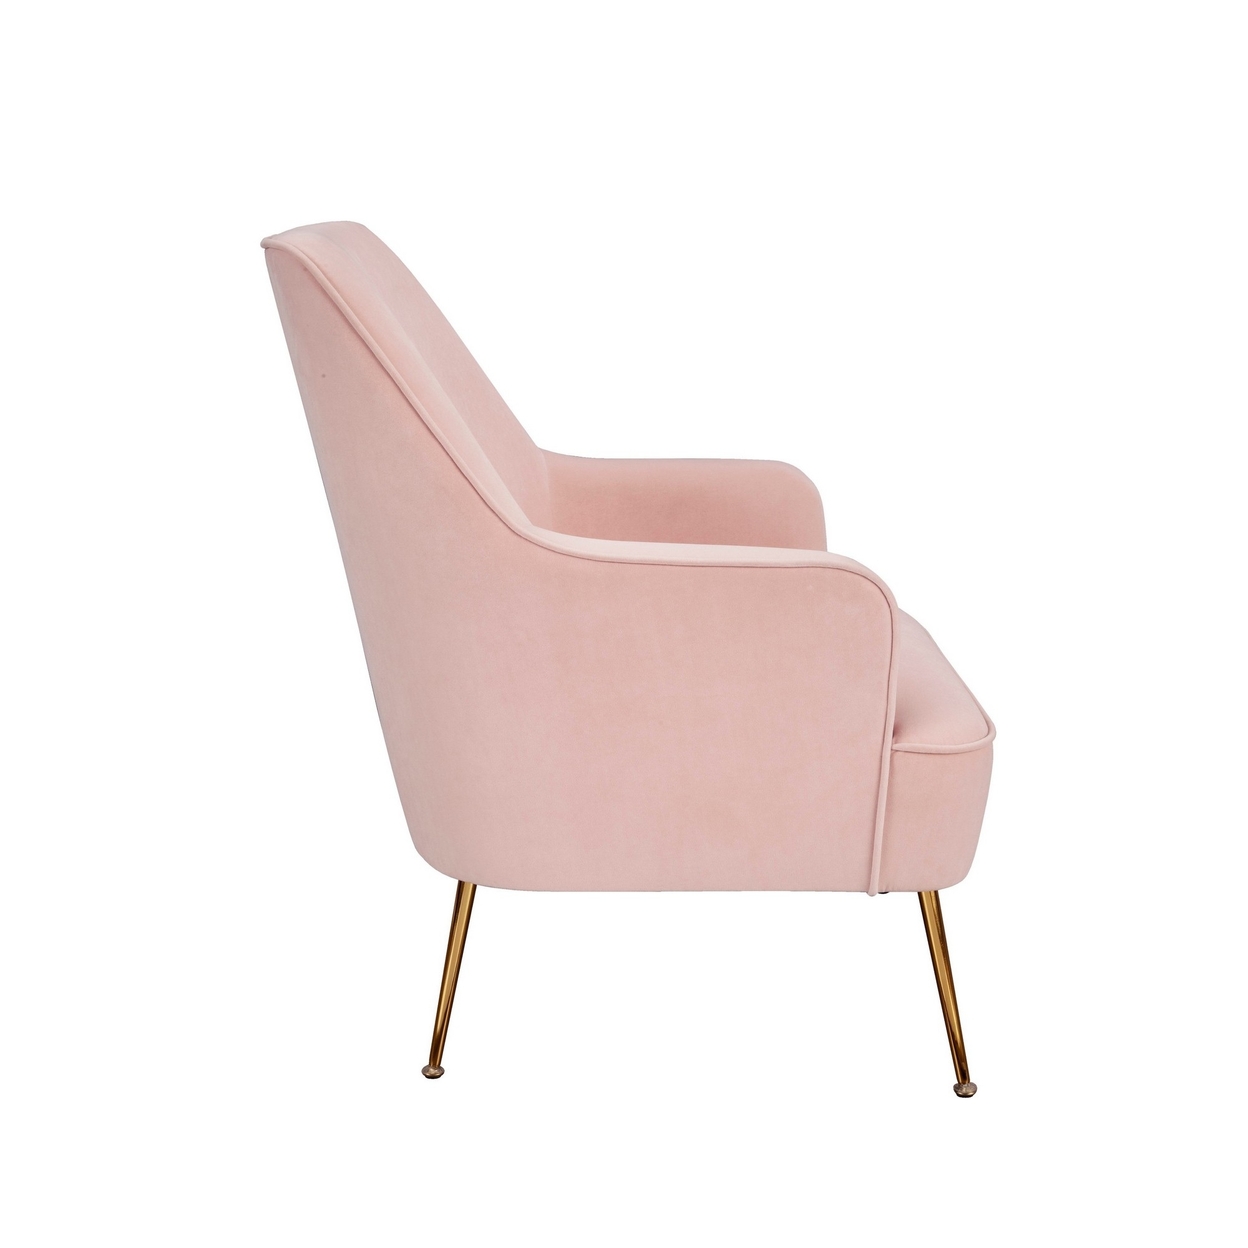 Accent Chair With T Cushioned Seat And Metal Legs, Pink- Saltoro Sherpi